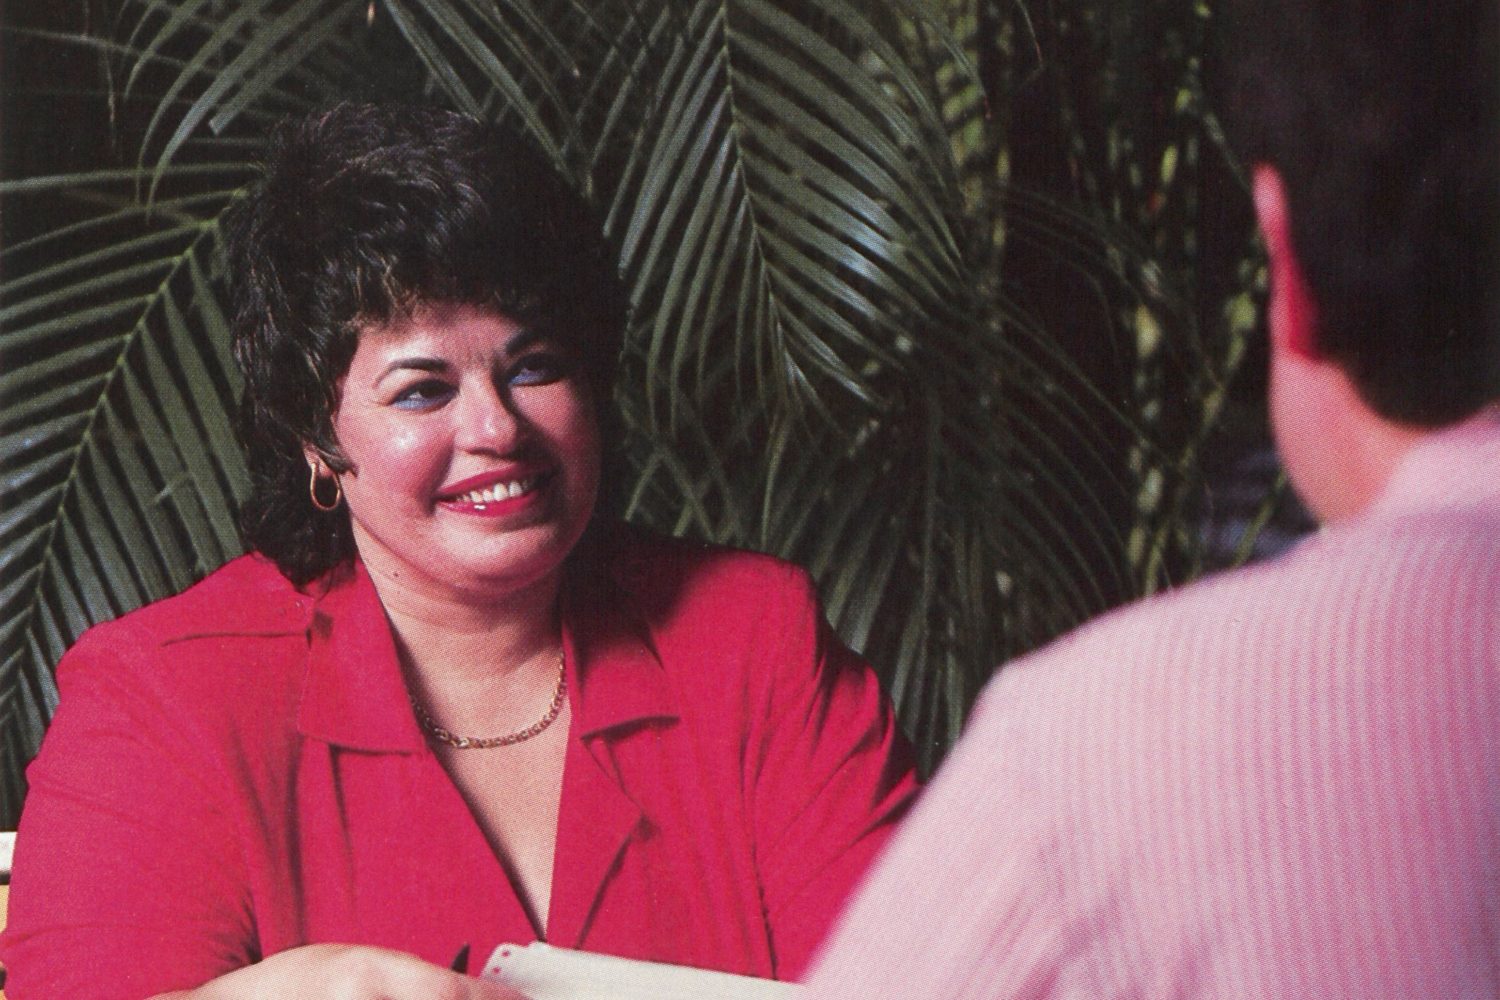 Mabel Esteves seated at a desk opposite a male colleague in 1988.